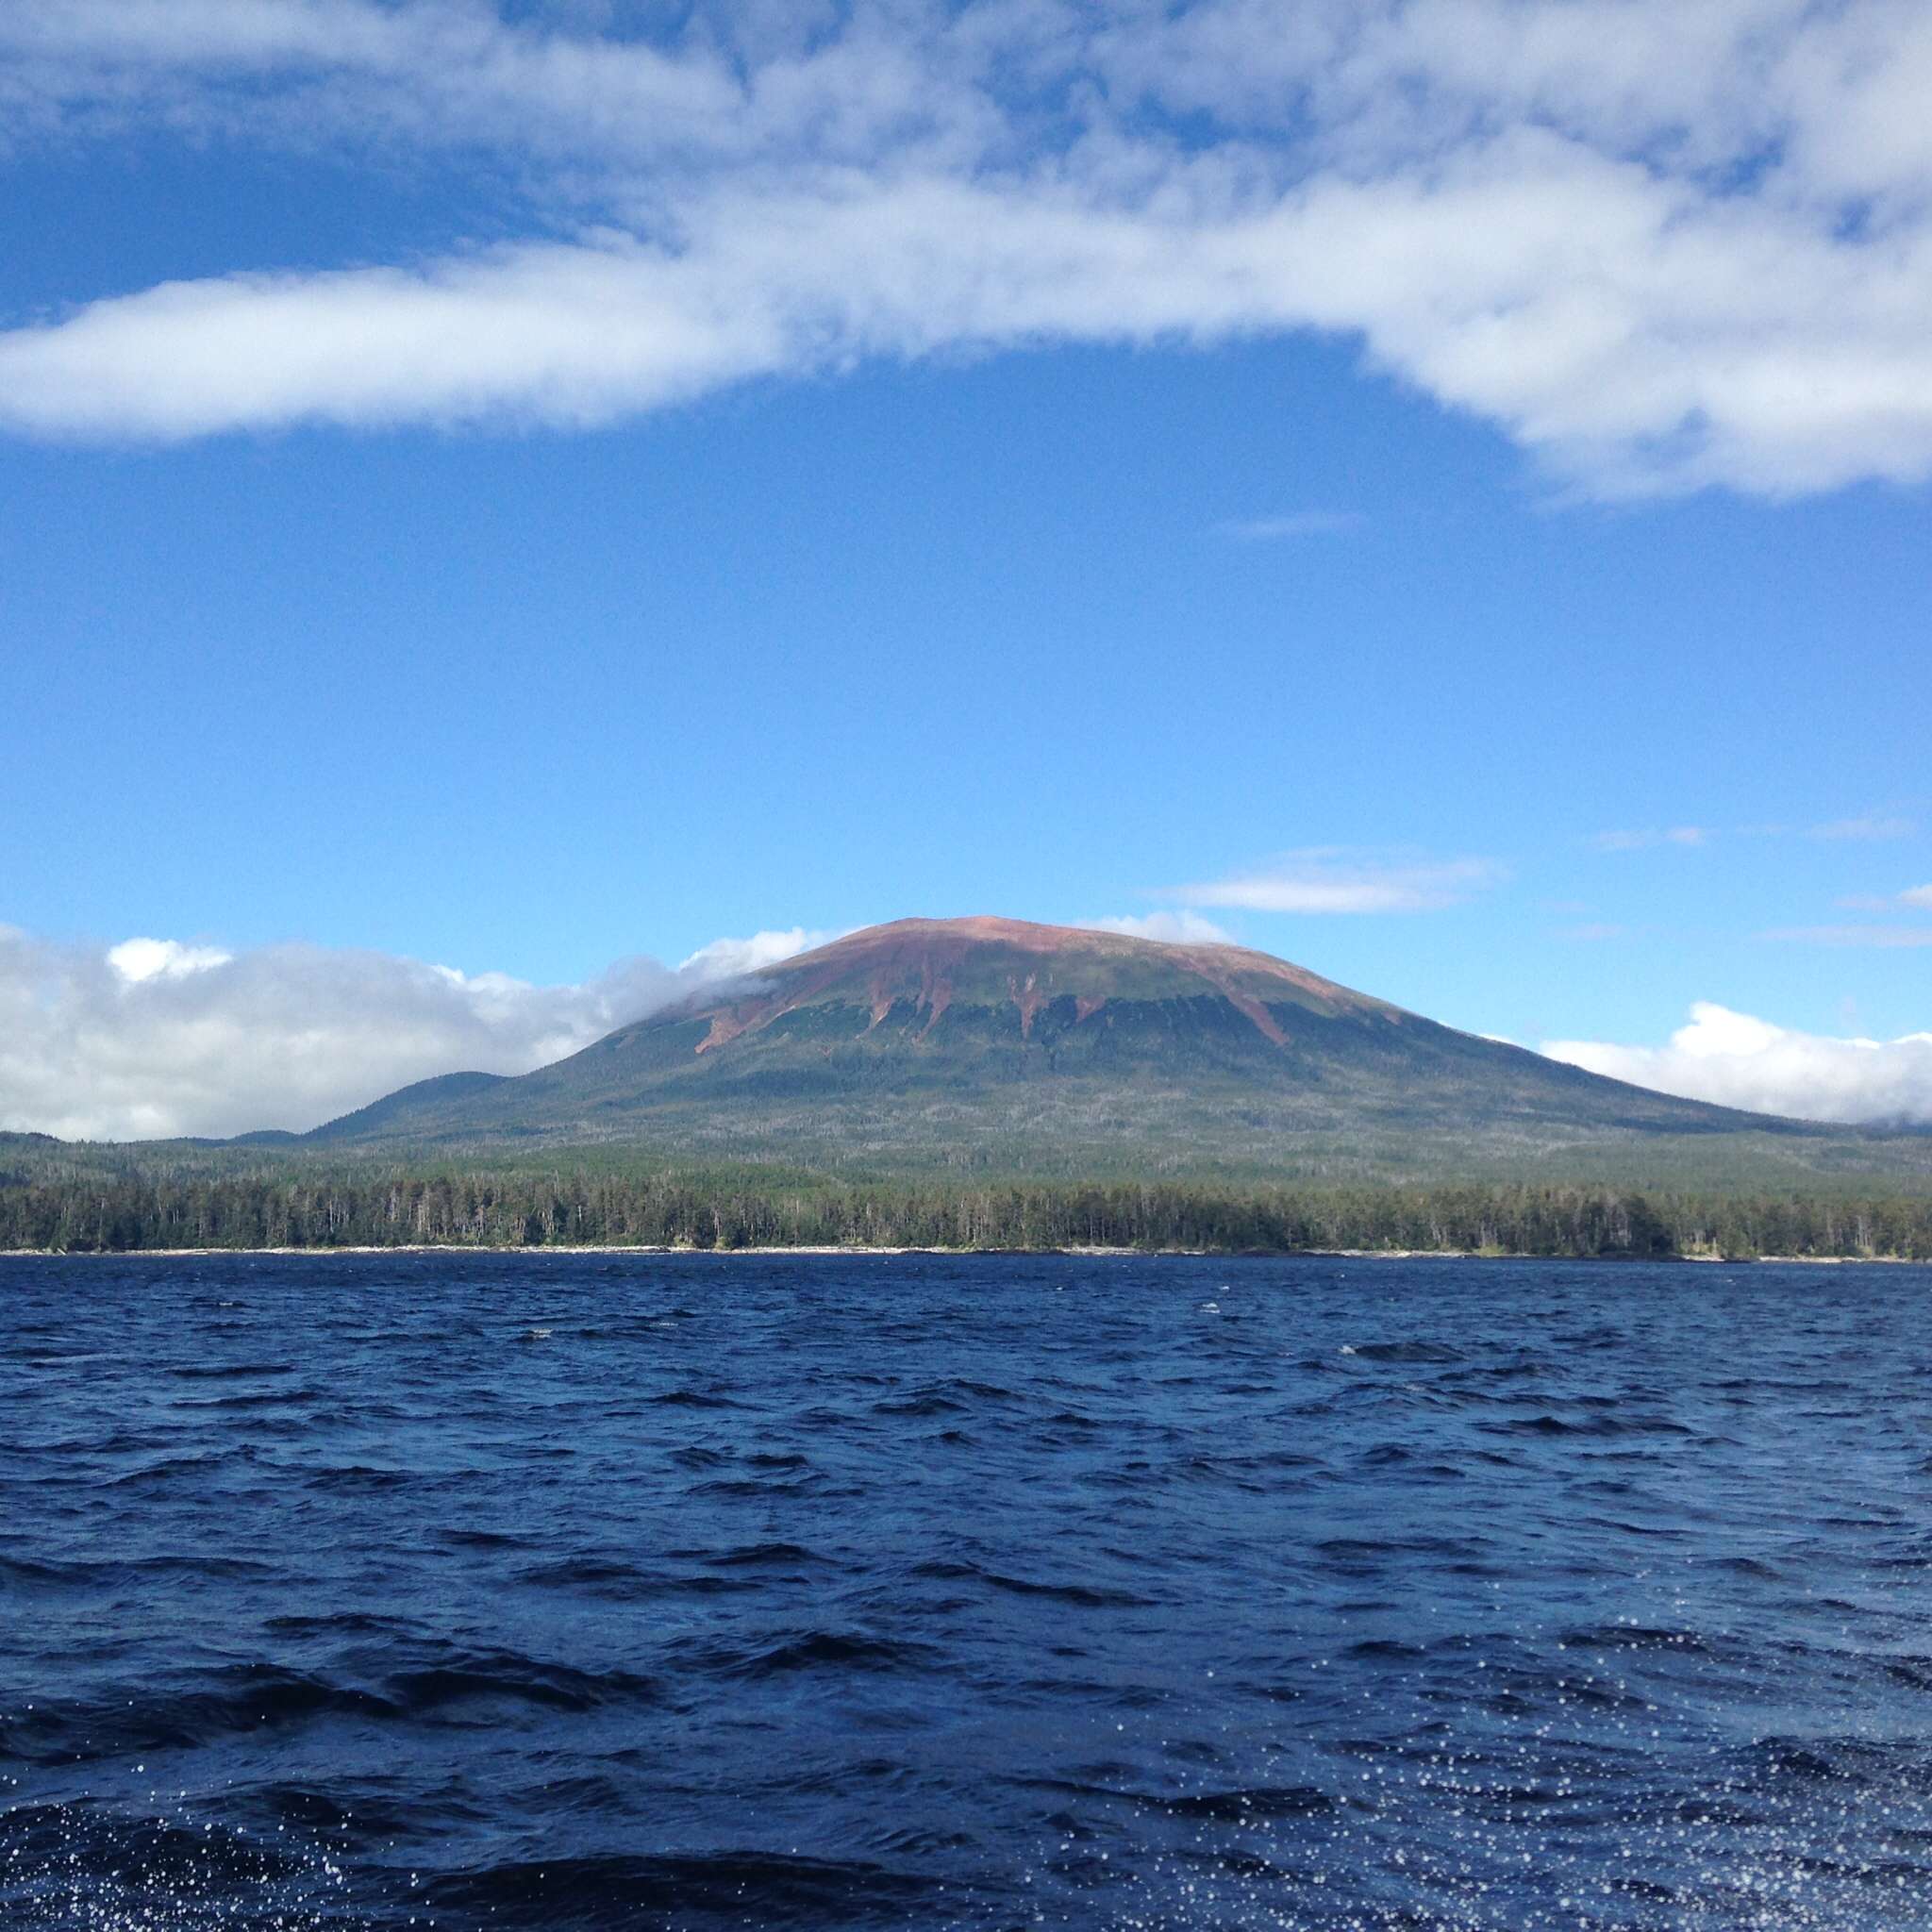 Clear blue skies and spectacular view of Mt. Edgecumbe.